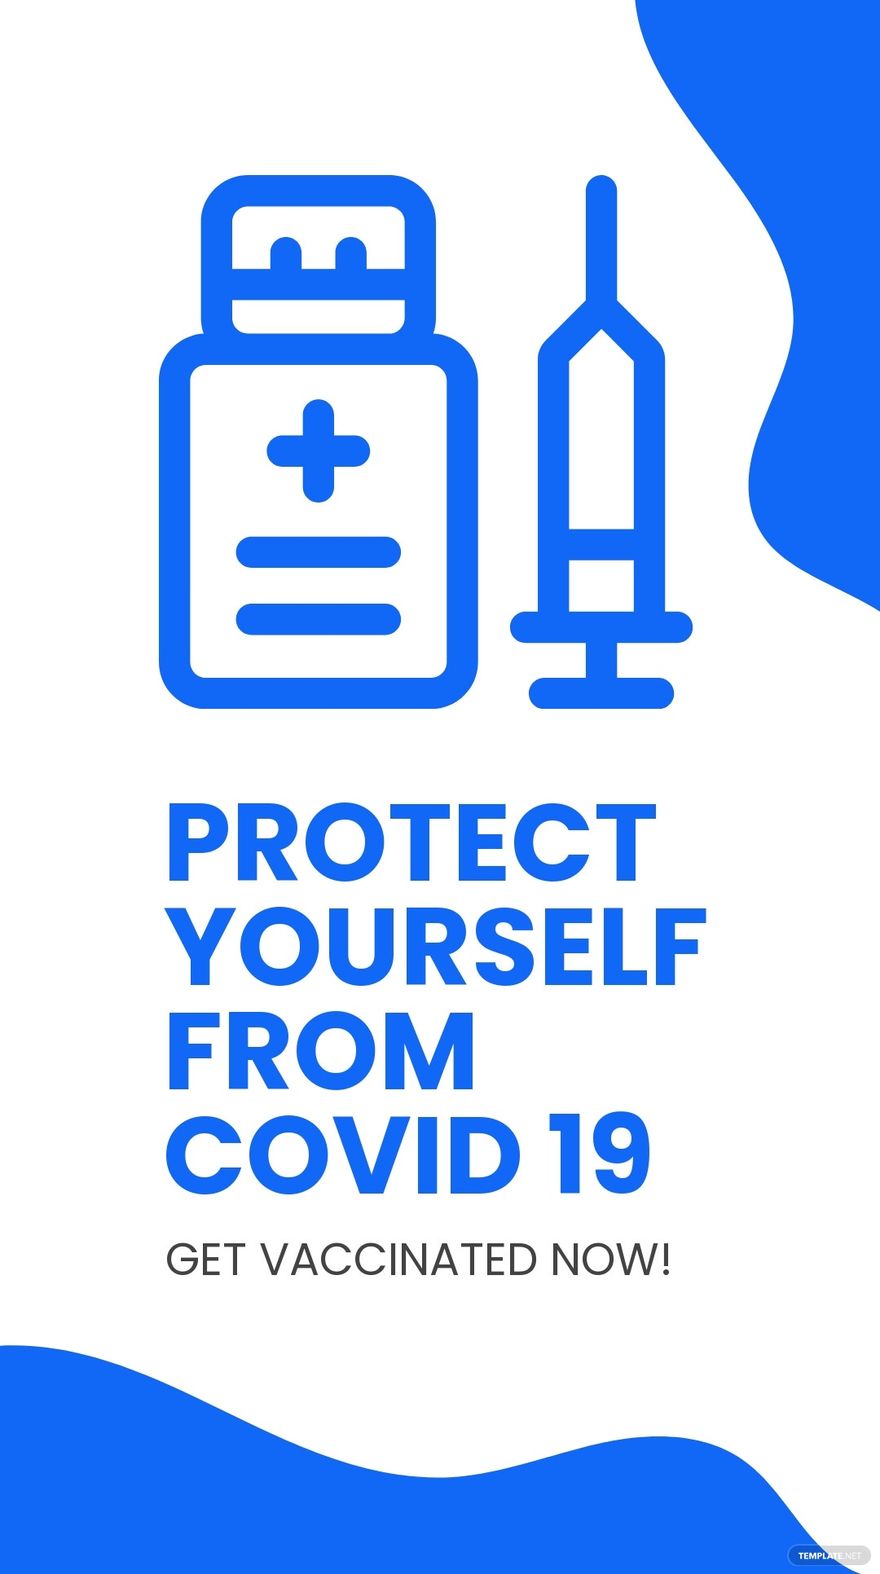 Covid 19 Vaccine Available Instagram Story Template.jpe